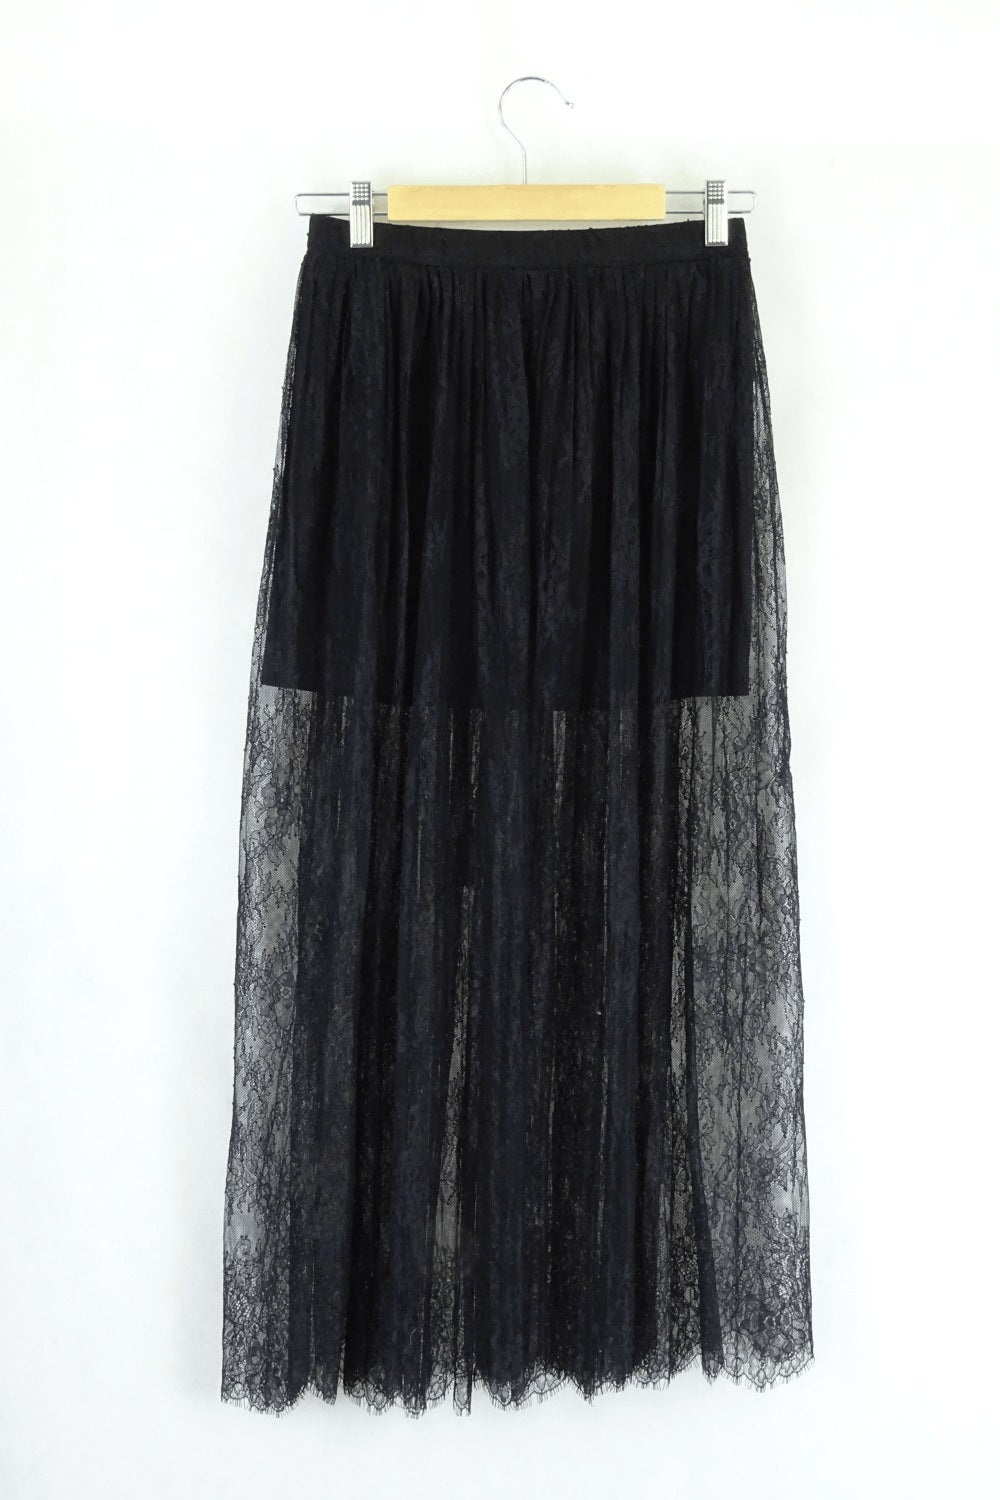 Forever 21 Lace Skirt Xs